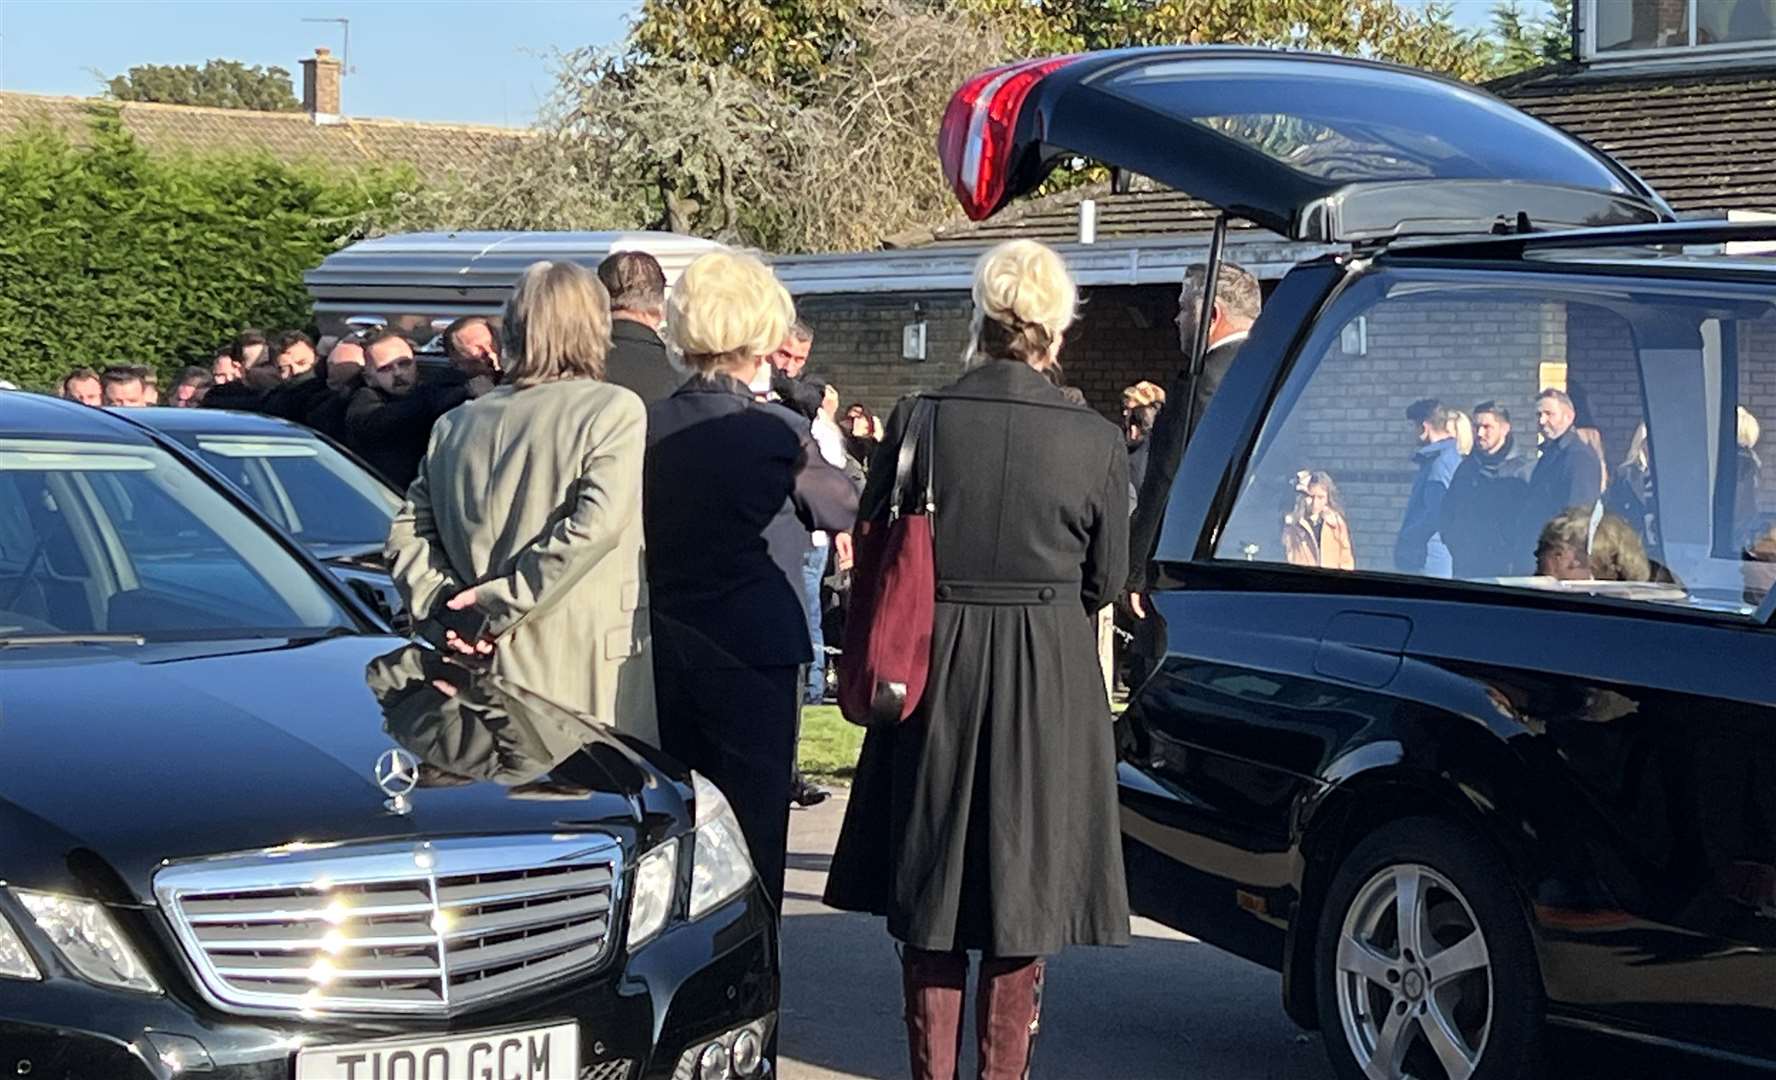 A funeral is being held for Jacko Cosgrove who died in a car crash in Lenham Road, Headcorn Picture: Barry Goodwin